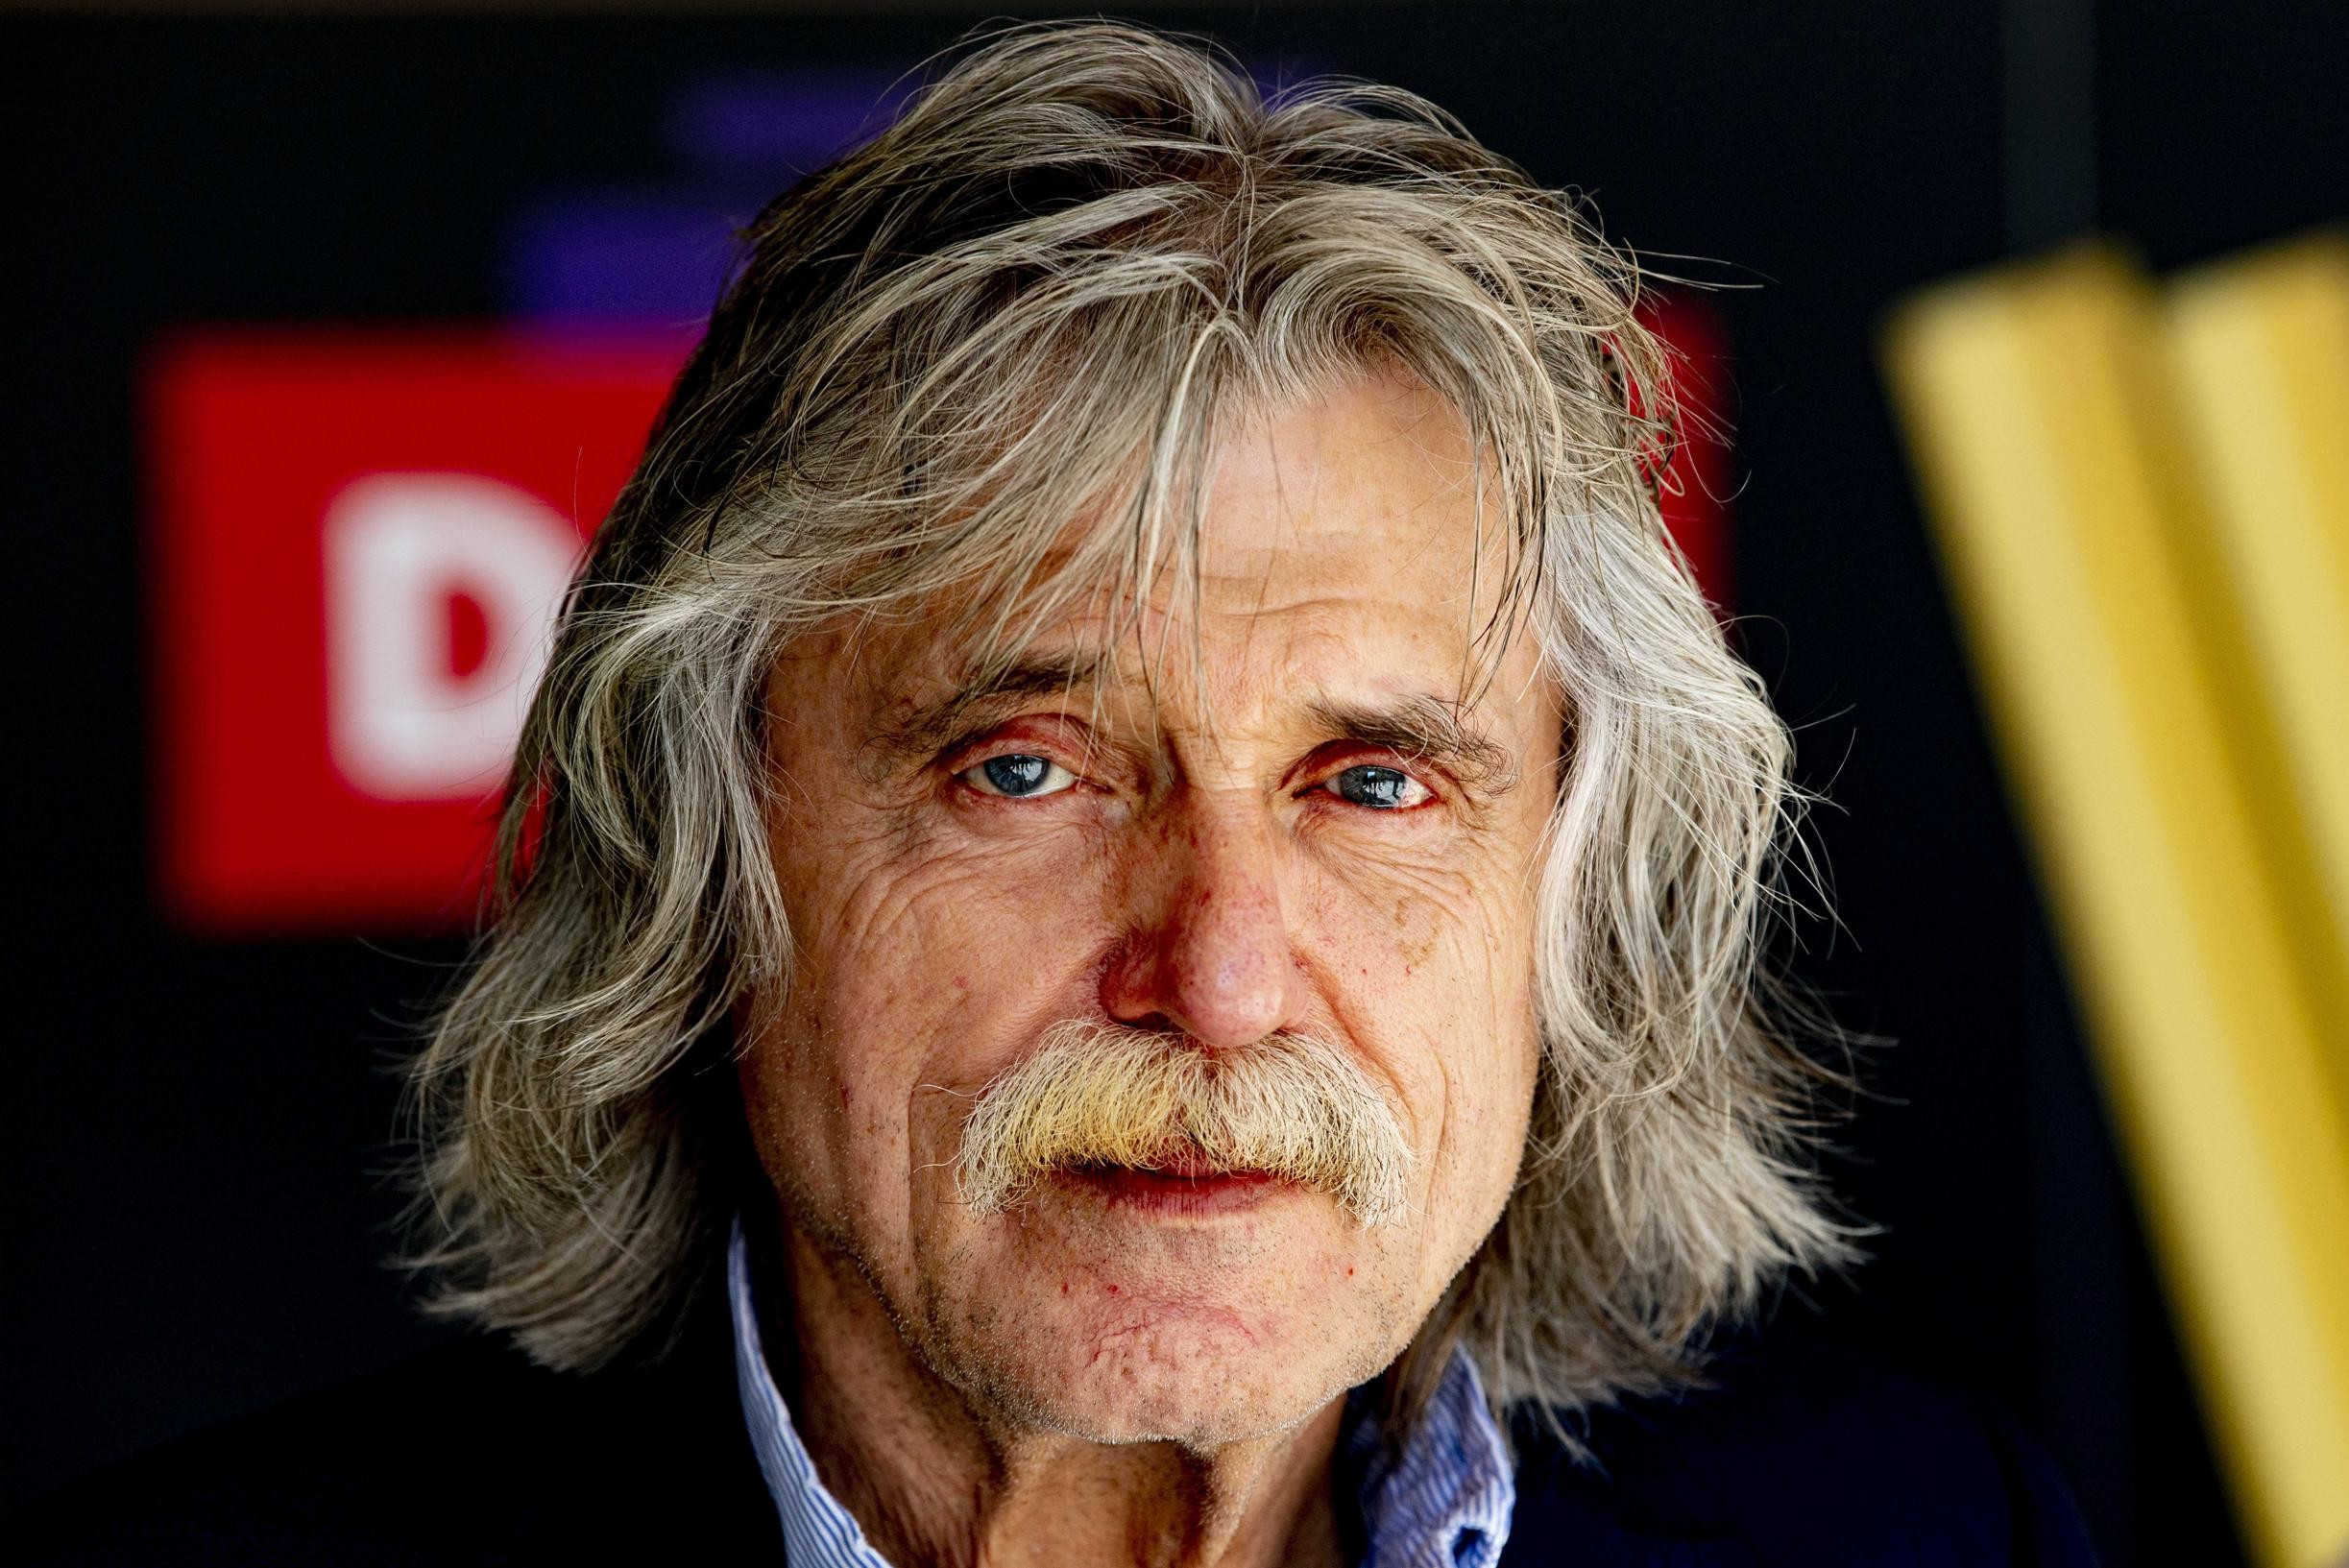 No apologies from Johan Derksen after a story about rape with a candle: “It was between her legs, not penetrated”